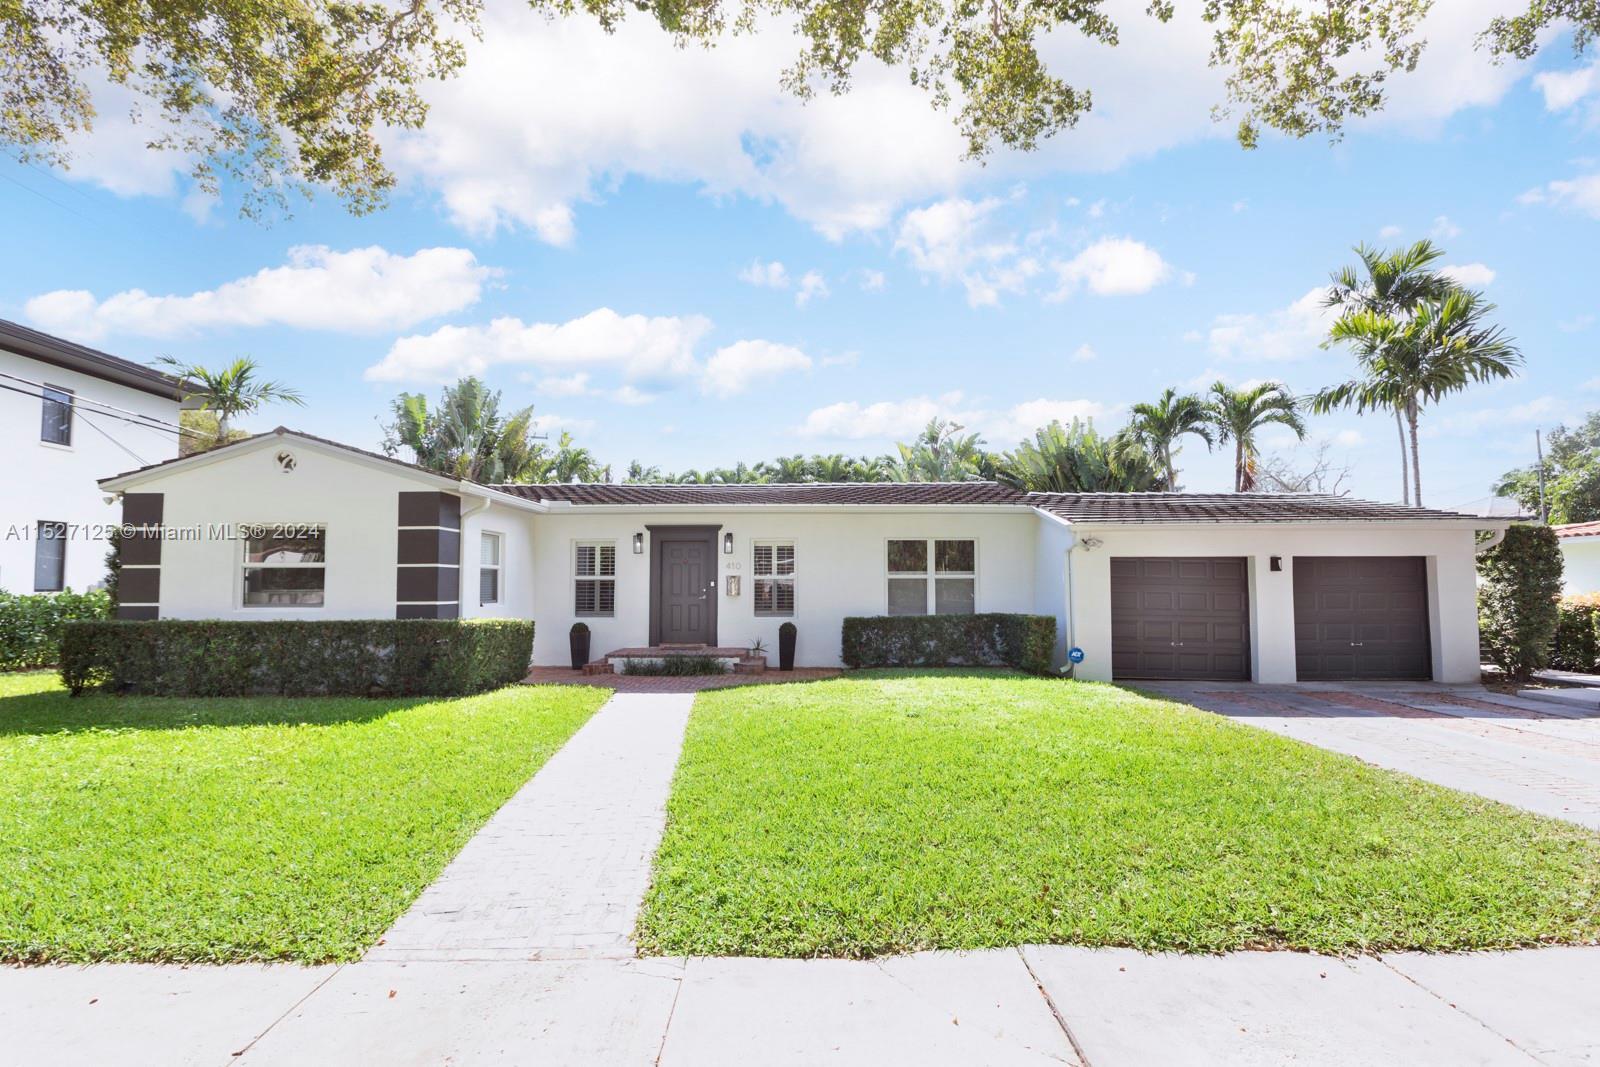 Charming 1-story house at Coral Gables, over a 12.500 SqFt Lot. Spacious living areas, 3 bedrooms wi